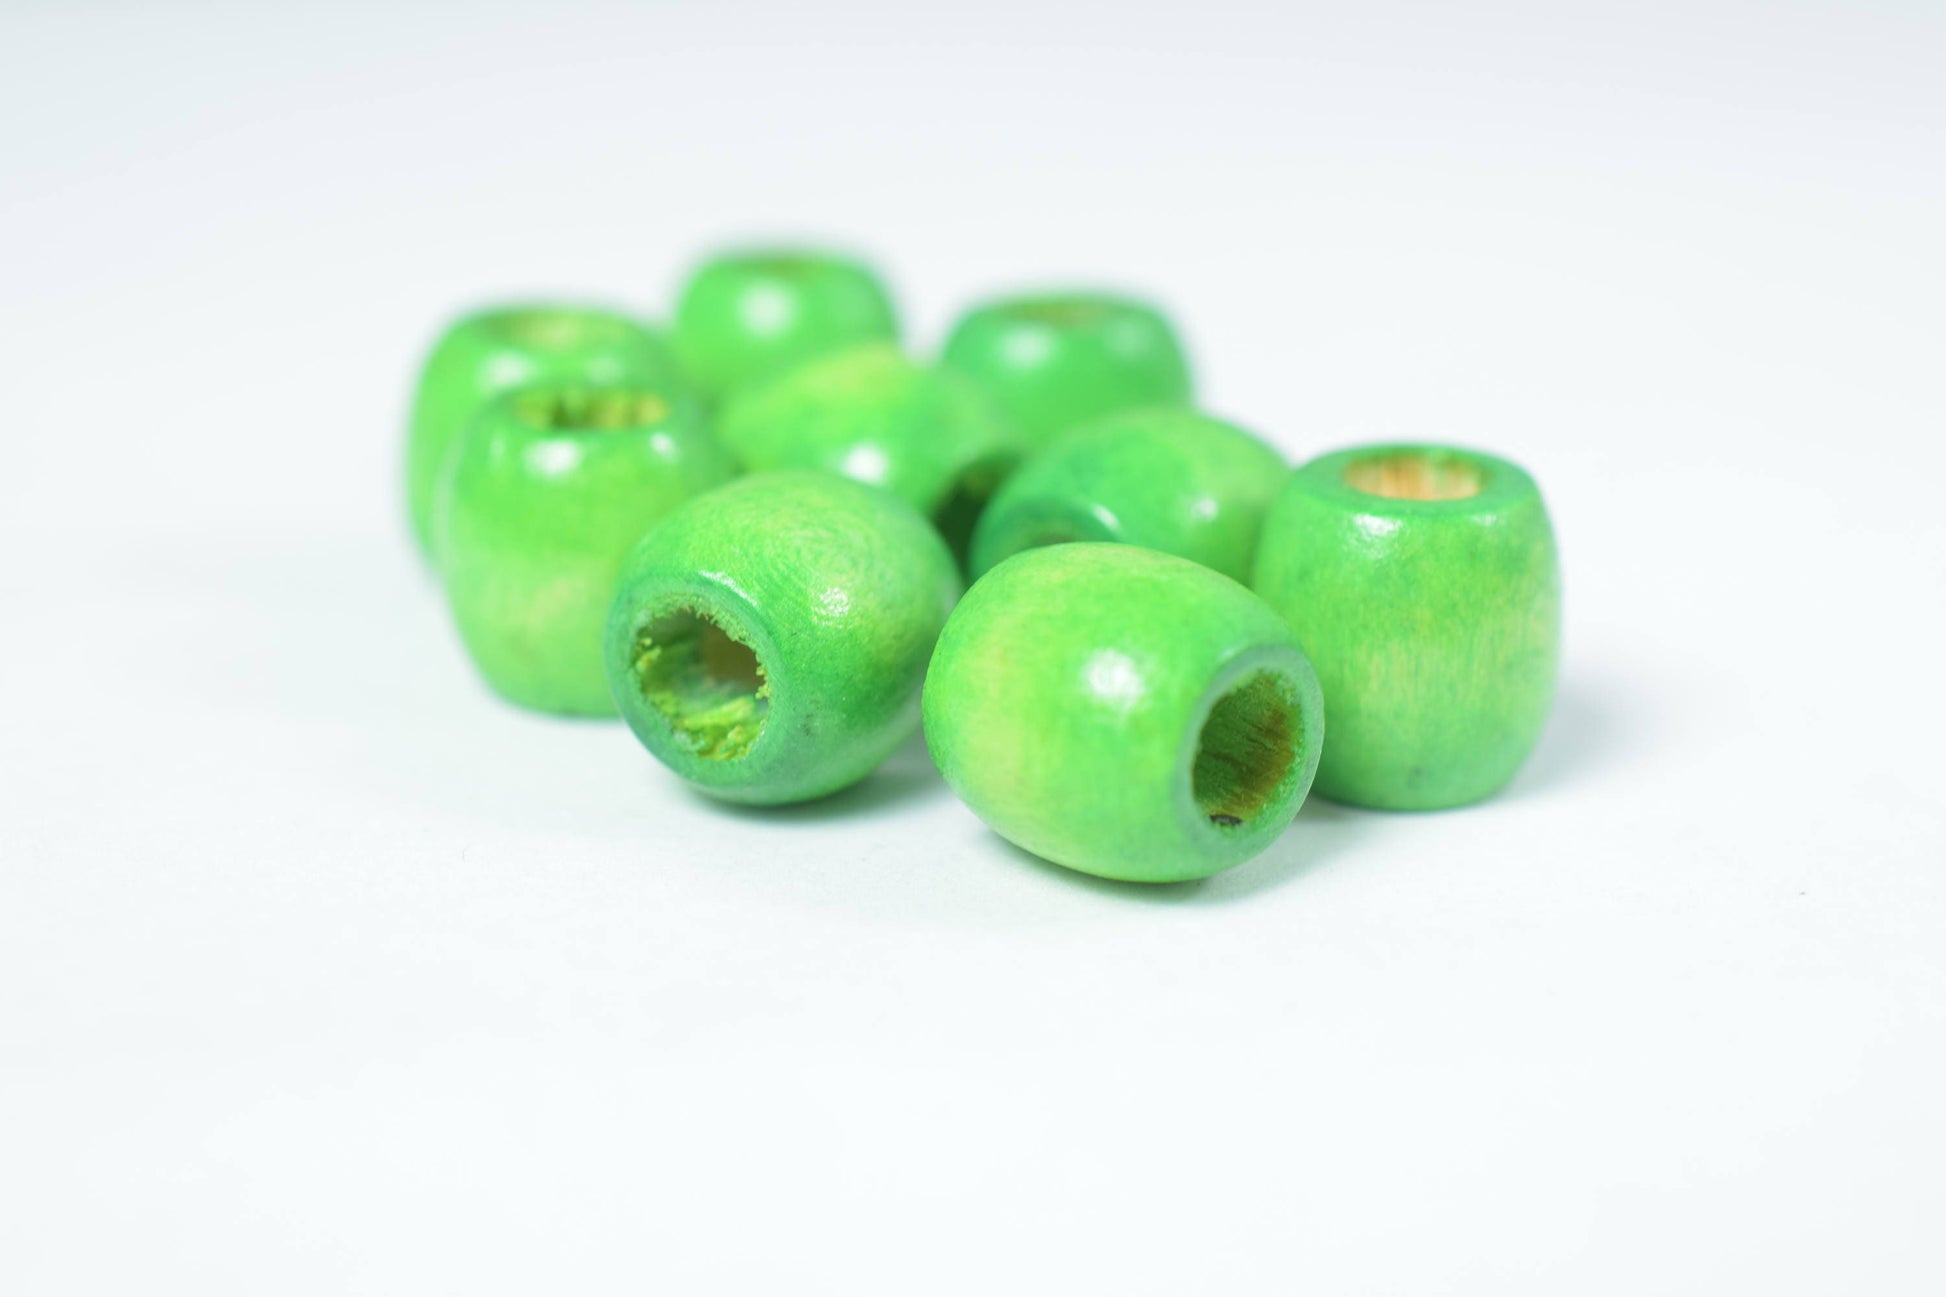 12mm Tube Round Large Hole Green Wooden Beads, Wooden Beading Tools, Large Hole Green Wood Beads,Sold by 1 pack of 250 PCs